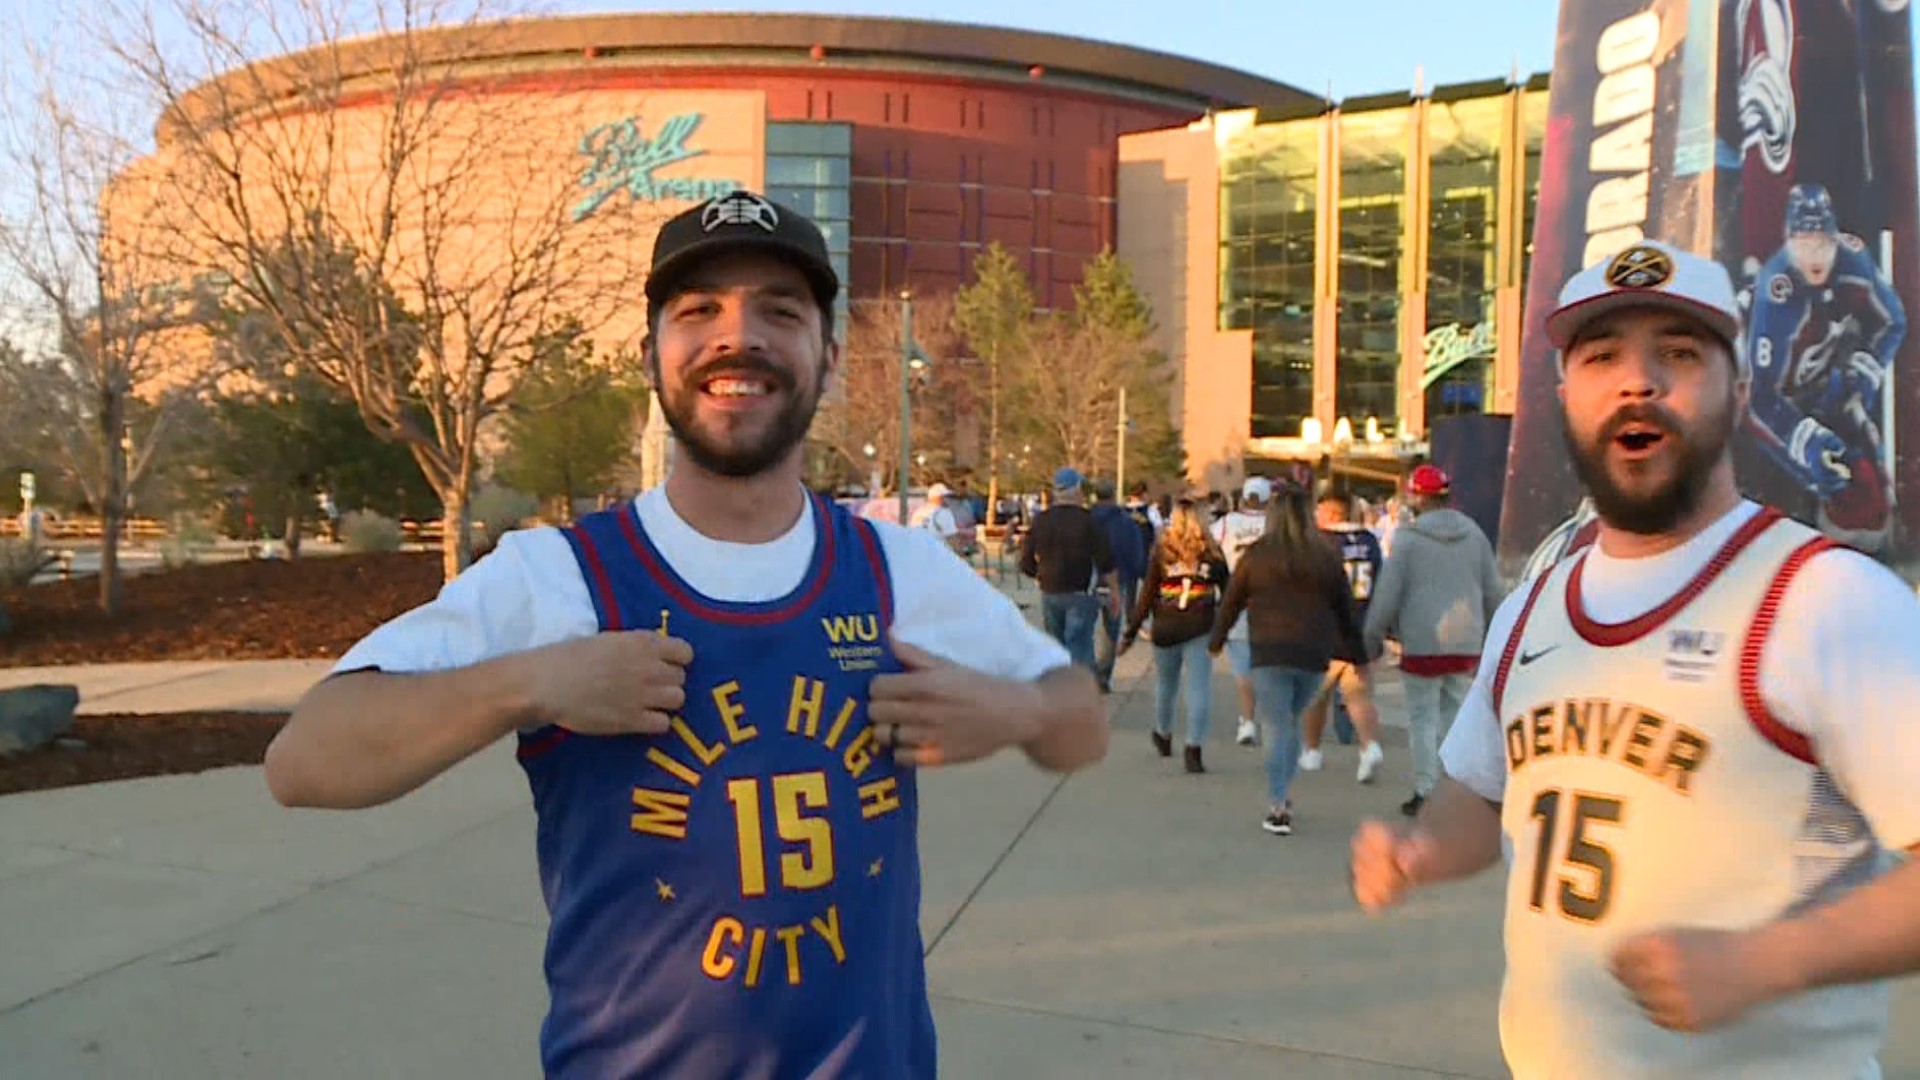 Fans outside Ball Arena give their playoff predictions ahead of Game 1 Sunday night.